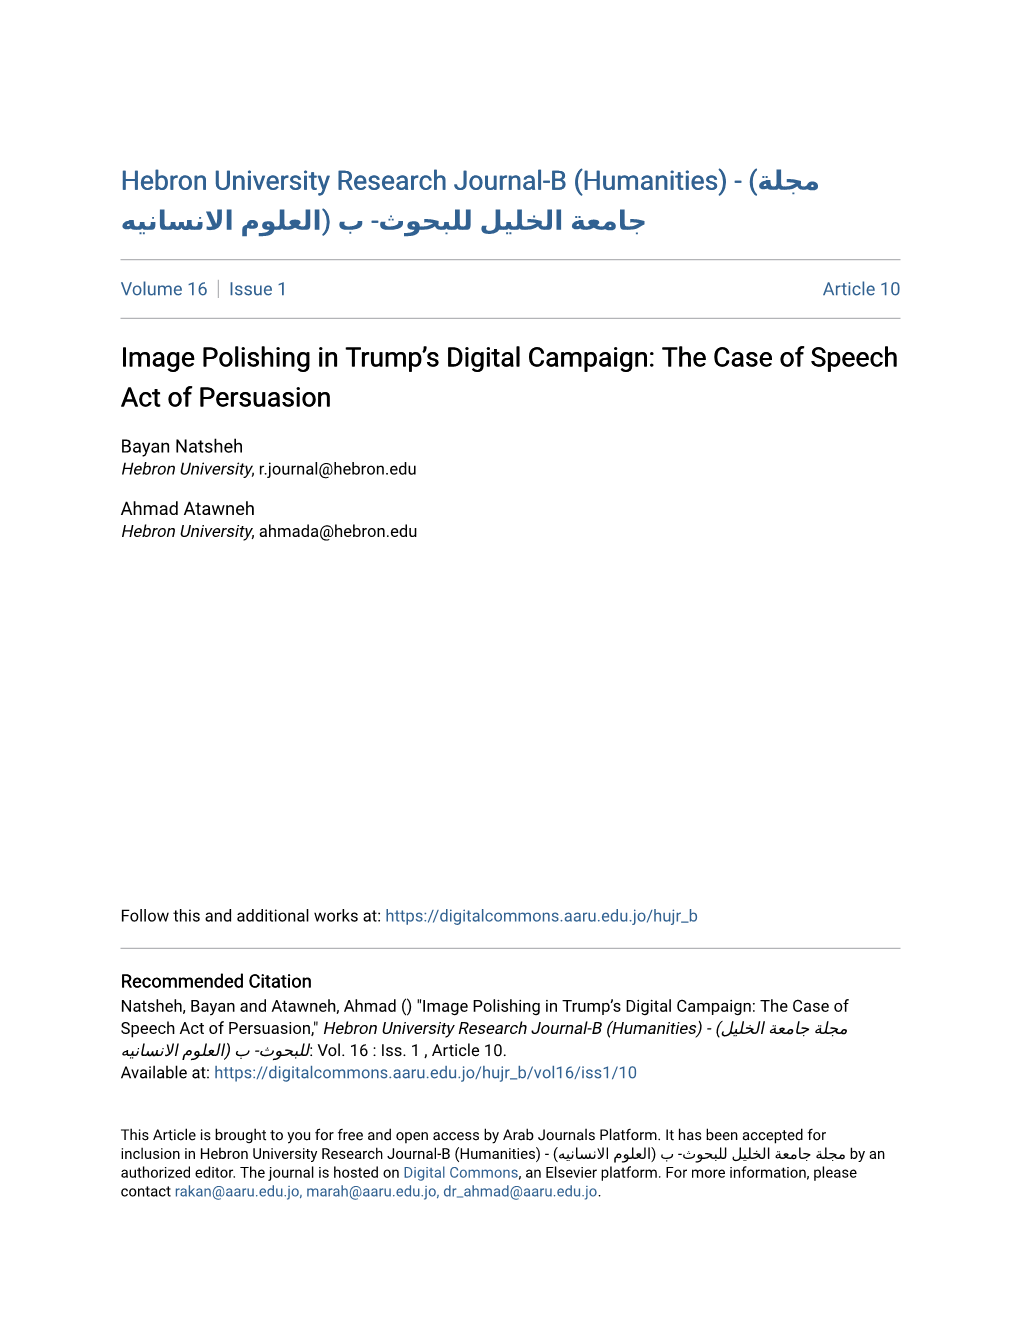 Image Polishing in Trump's Digital Campaign: the Case of Speech Act